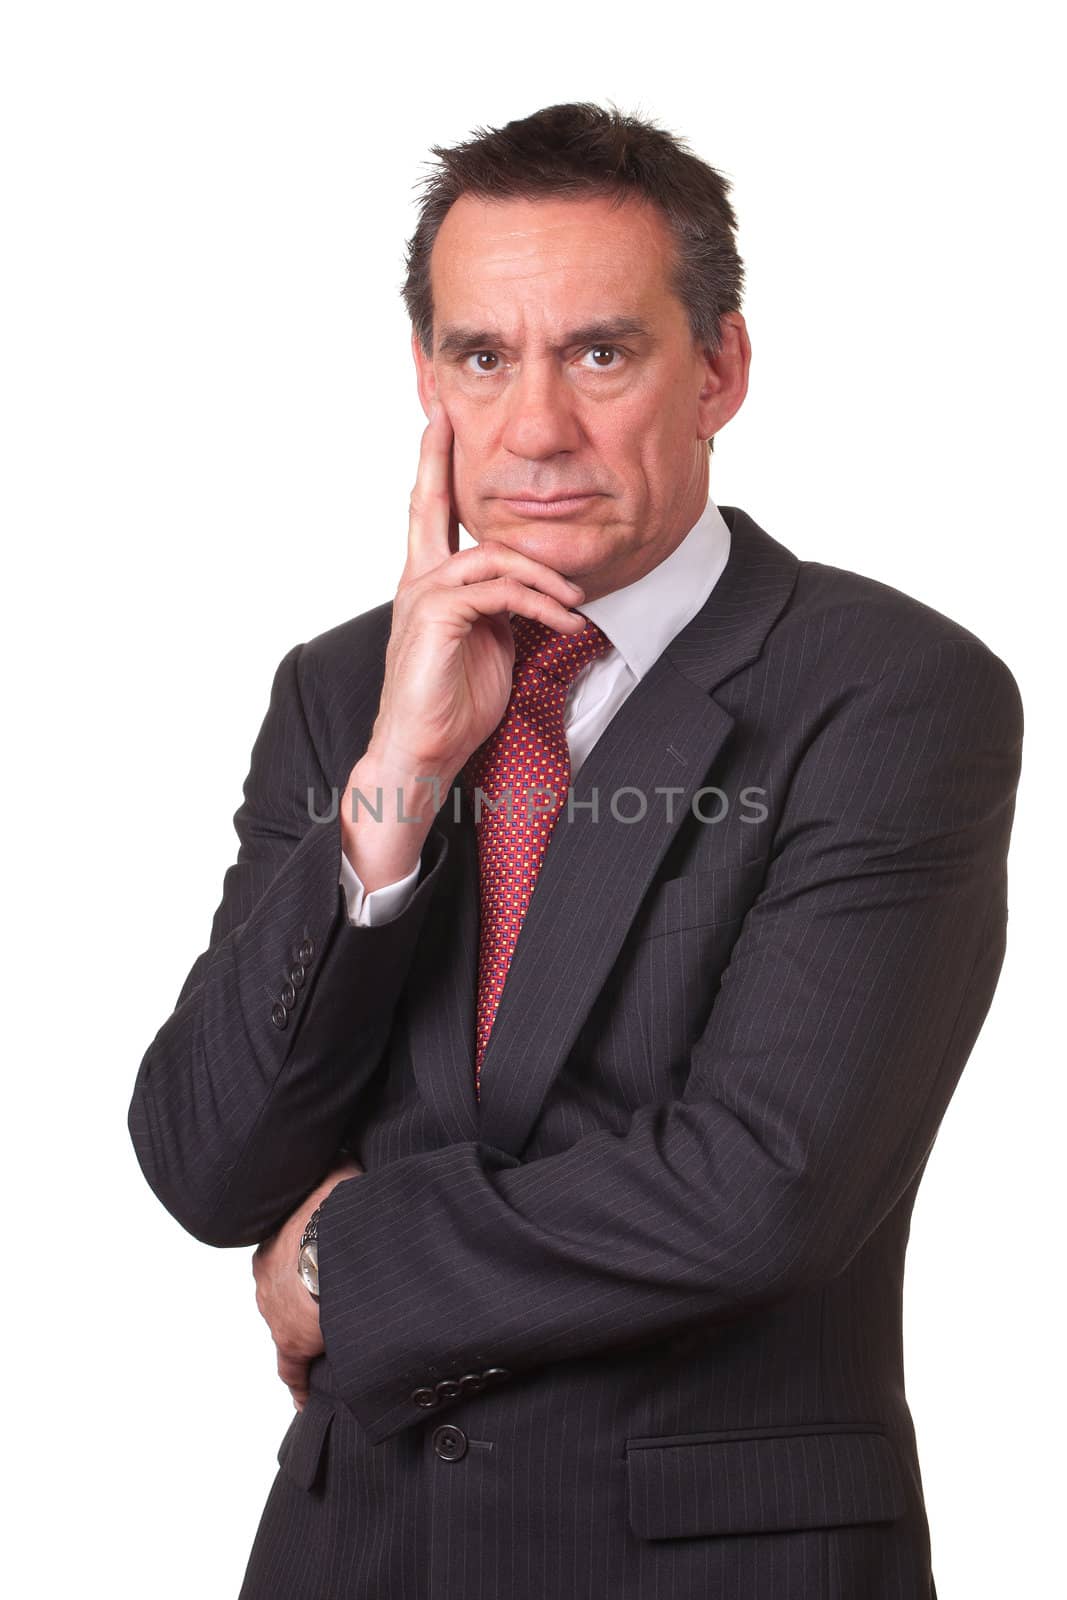 Frowning Angry Middle Age Business Man in Suit with Hand to Face Isolated